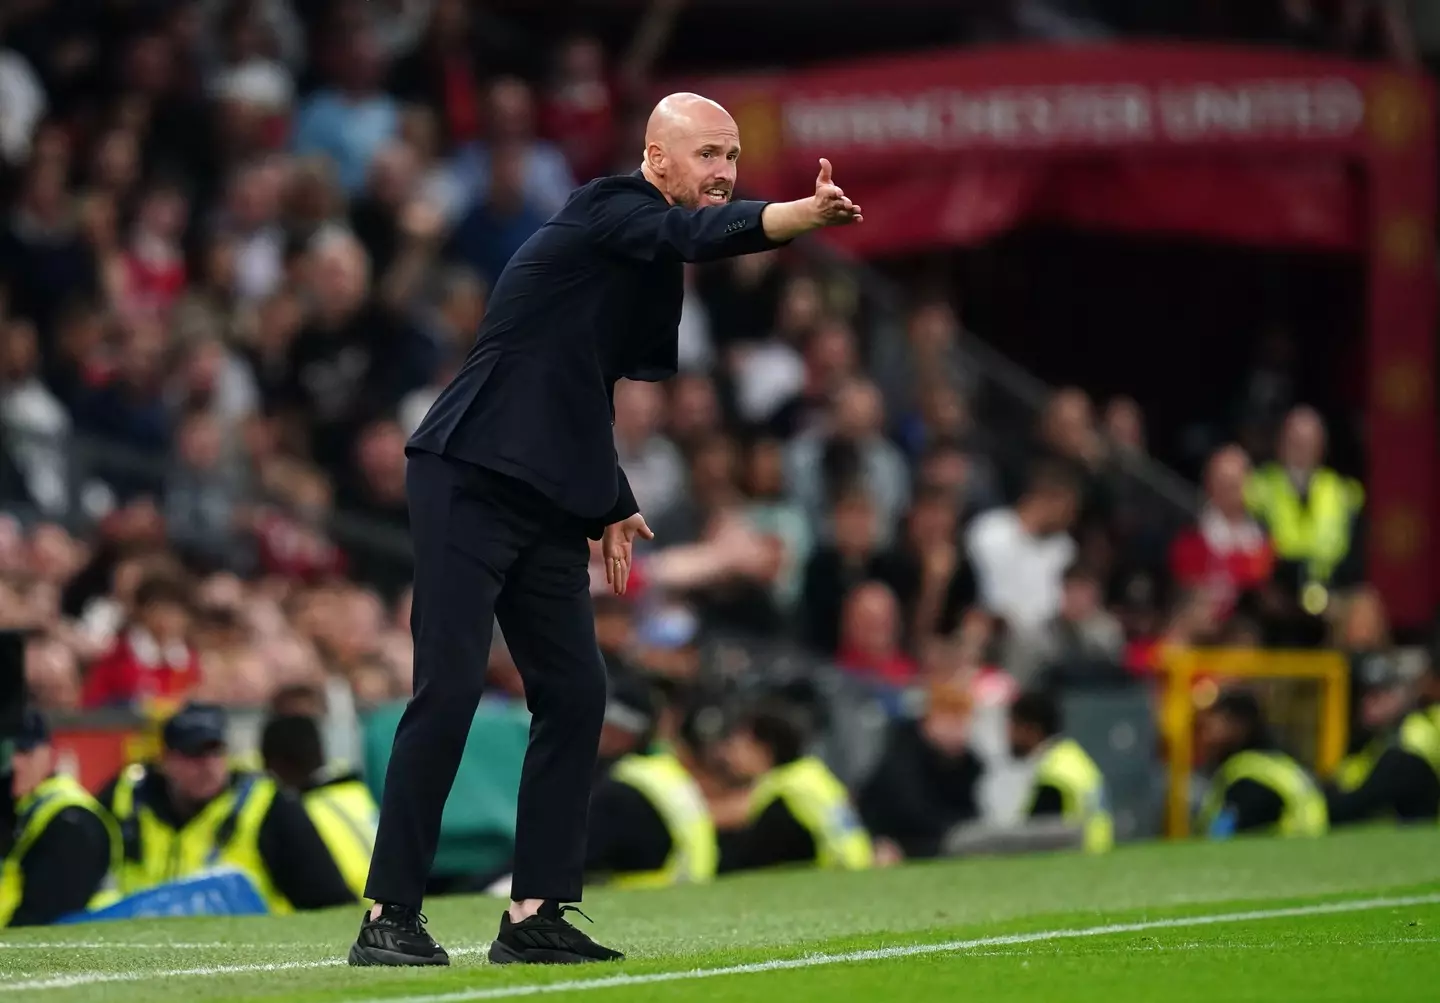 Erik ten Hag is always very active on the Manchester United touchline. (Alamy)